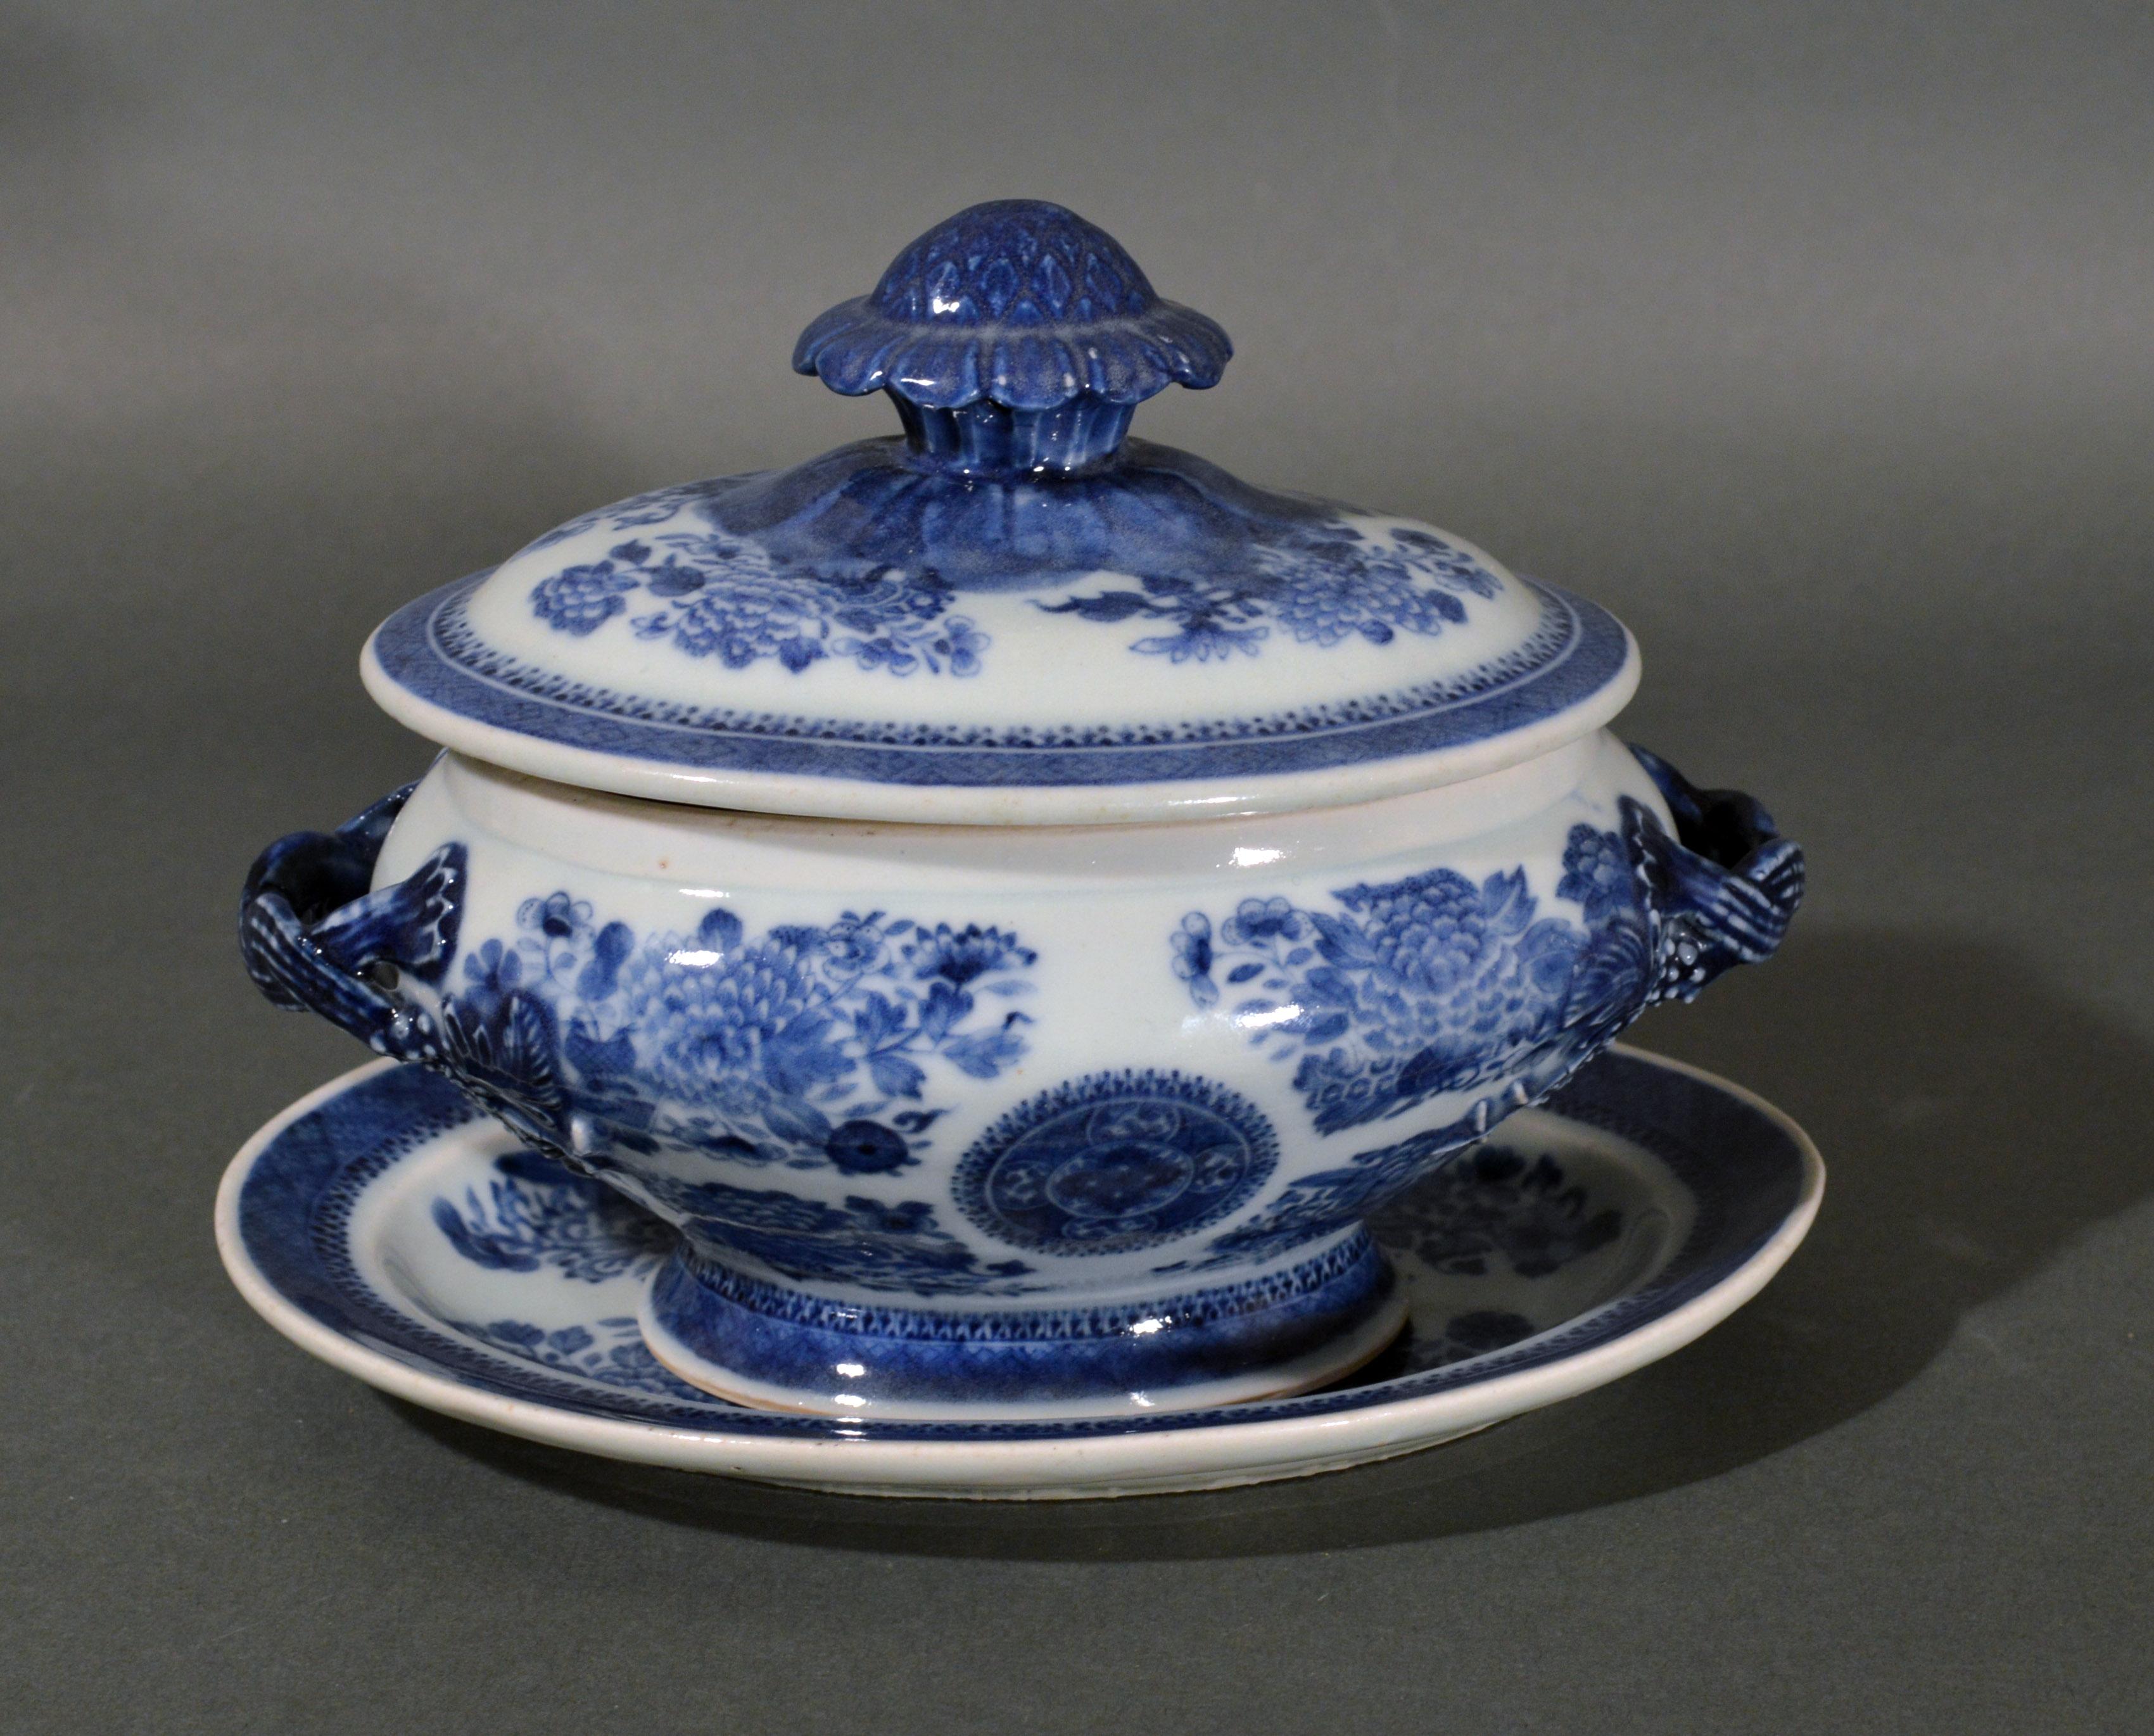 Chinese Export Porcelain Blue Fitzhugh Sauce Tureens, Covers & Stands For Sale 2